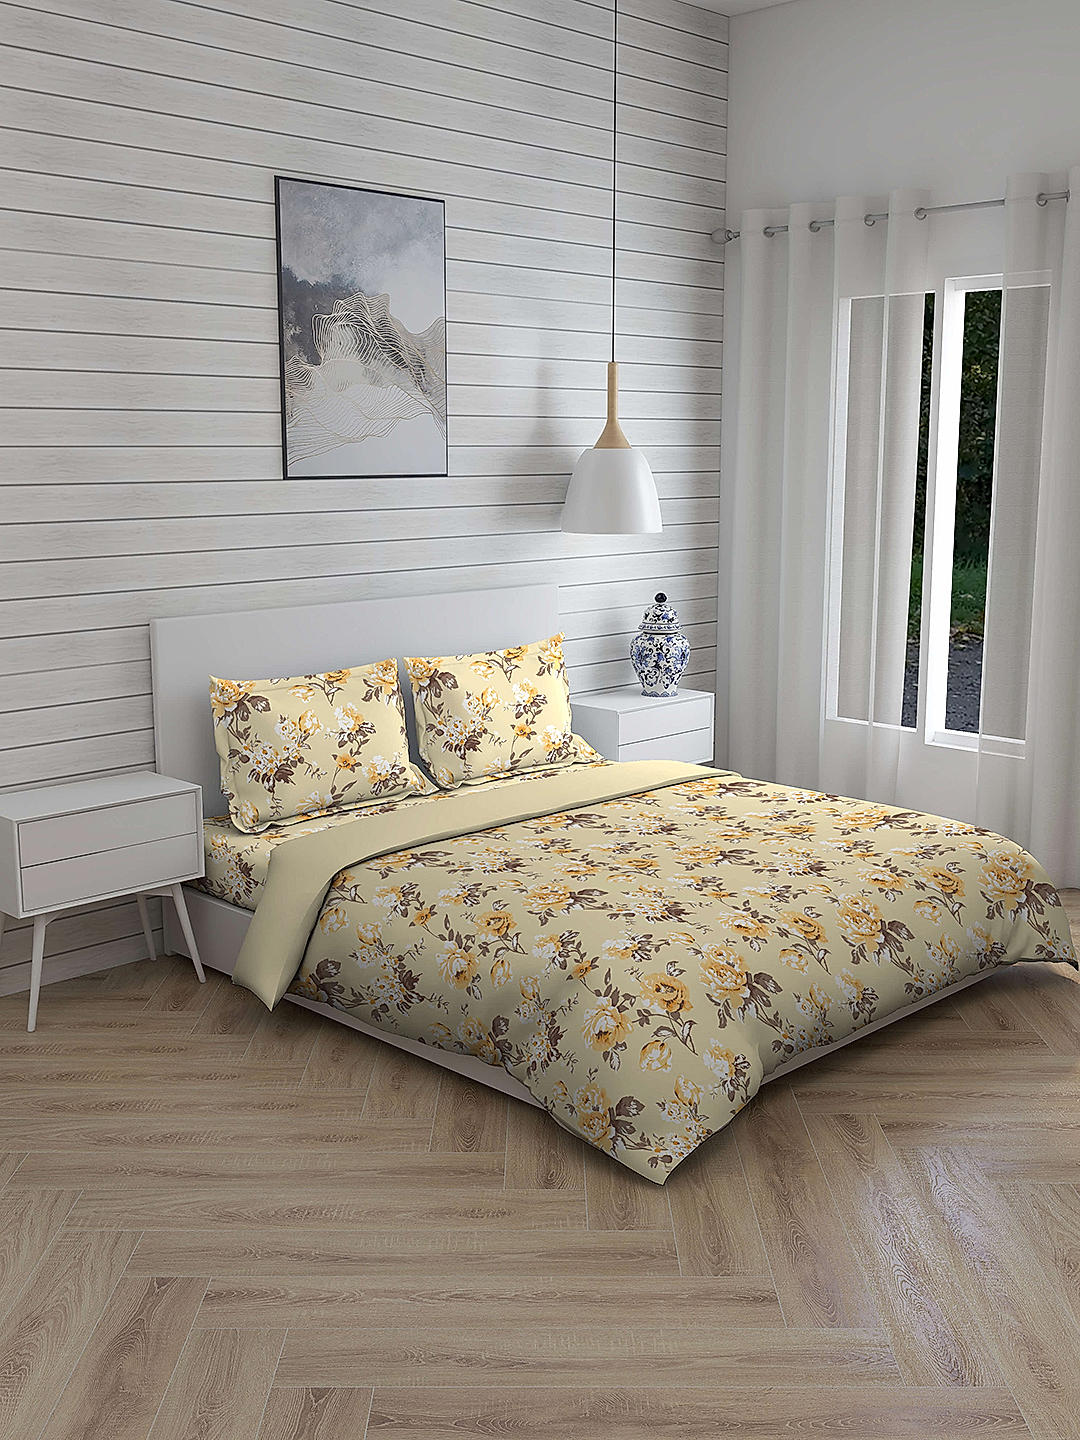 Jade  Super Fine Beige Colored Floral Print Double Cordinated Bedding set with Bedsheet, Pillow Cover & Comforter